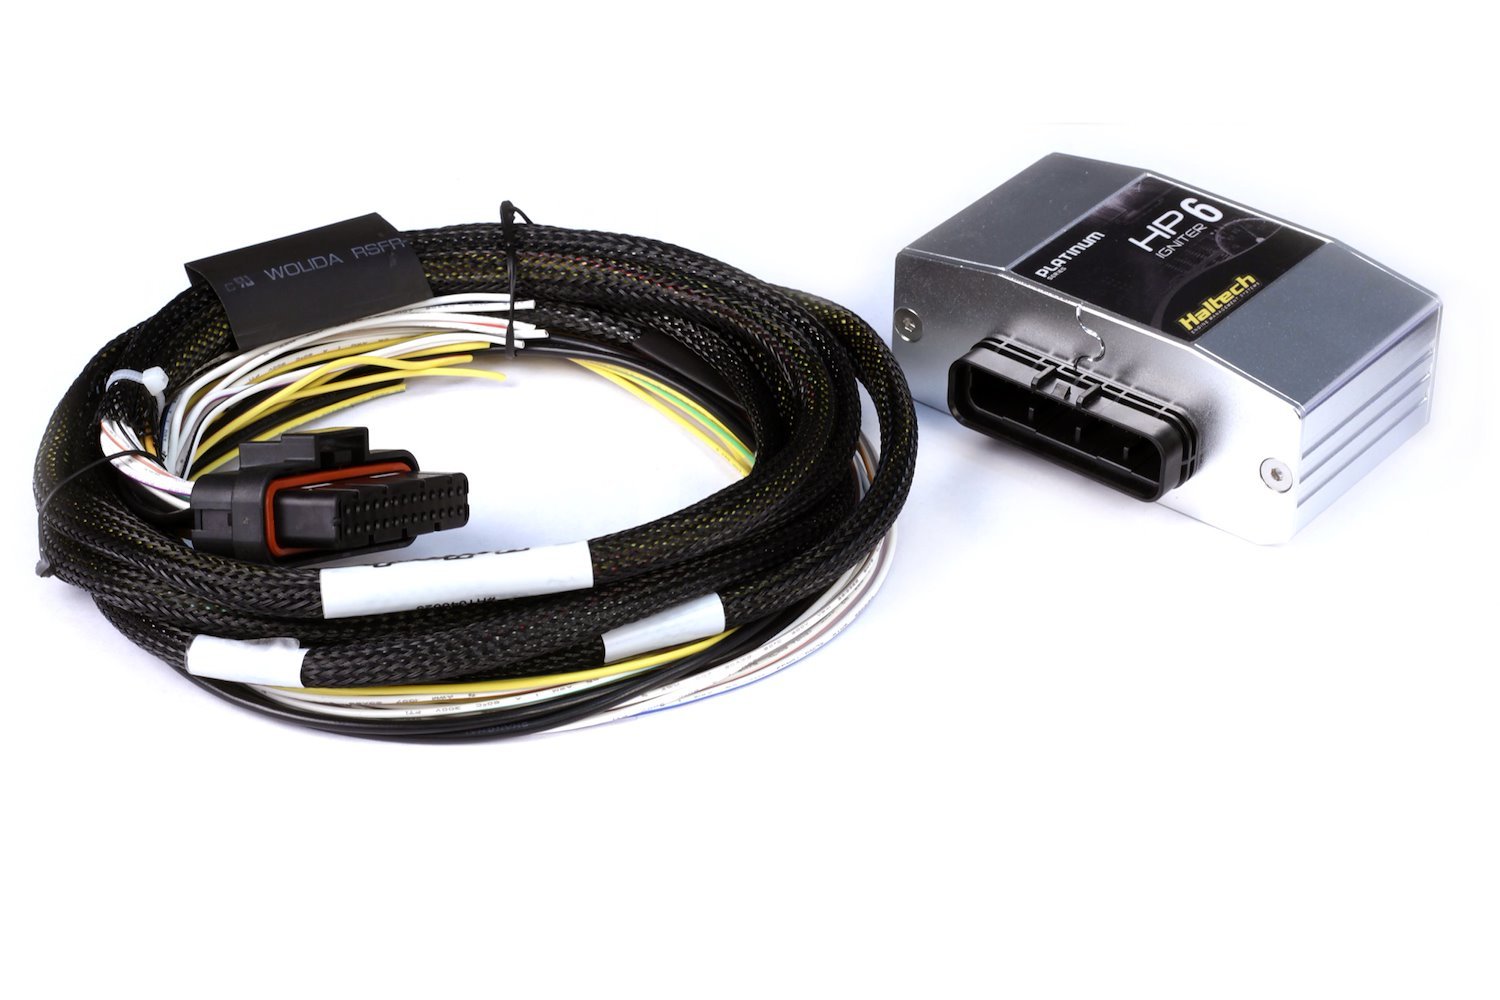 HT-020039 HPI6 High Power Igniter, Six Channel, 2 m Flying Lead Kit